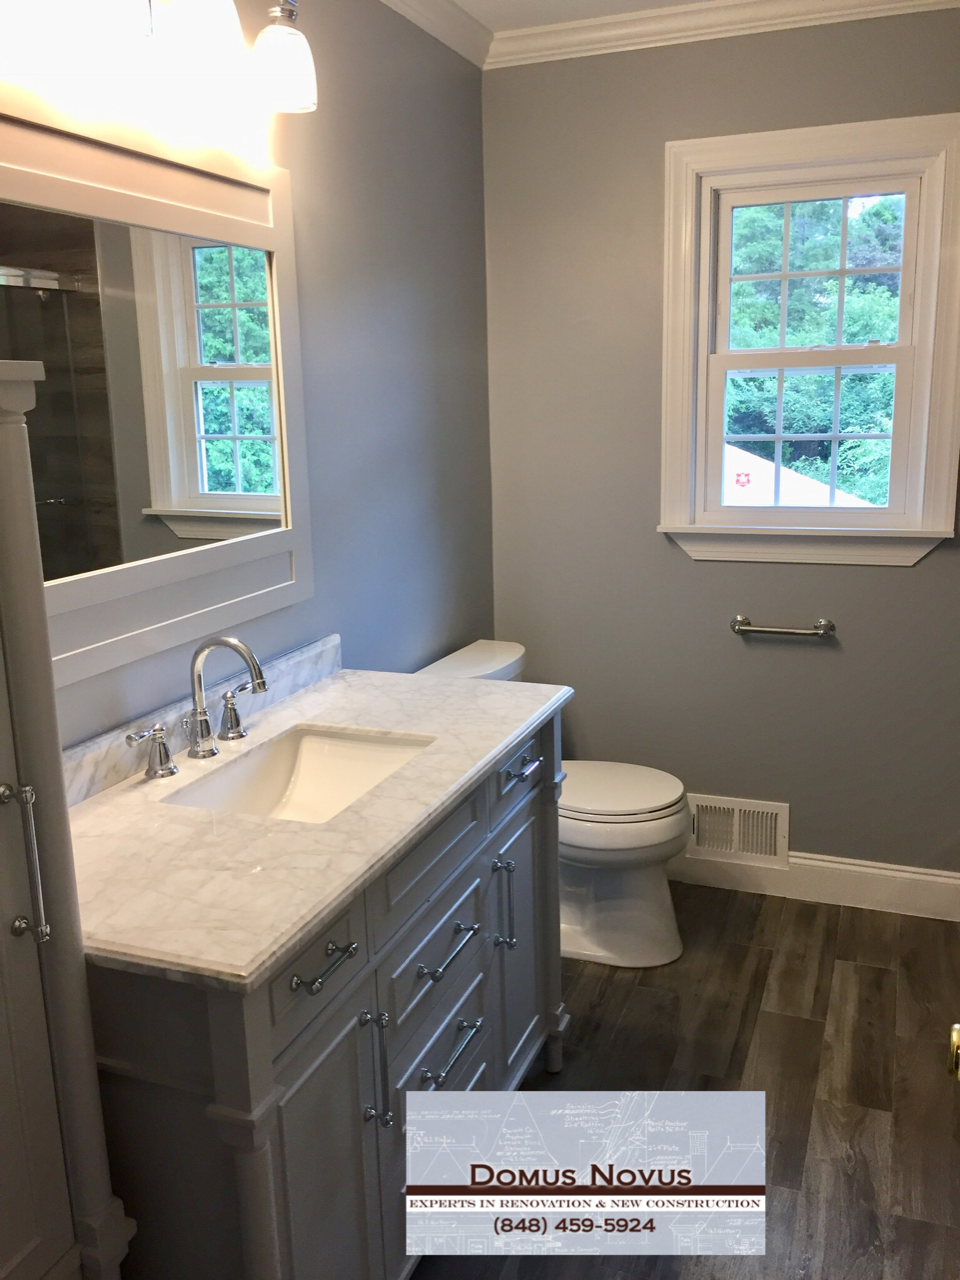 Bathroom, Sink, Toilet, Mirror, Winodw, Door, Floor, Shower, Shower Light, After Remodeling A Bathroom. Work done by General Contractors of Domus Novus LLC. Mydomusnovus projects. Experts in renovations and new constructions.